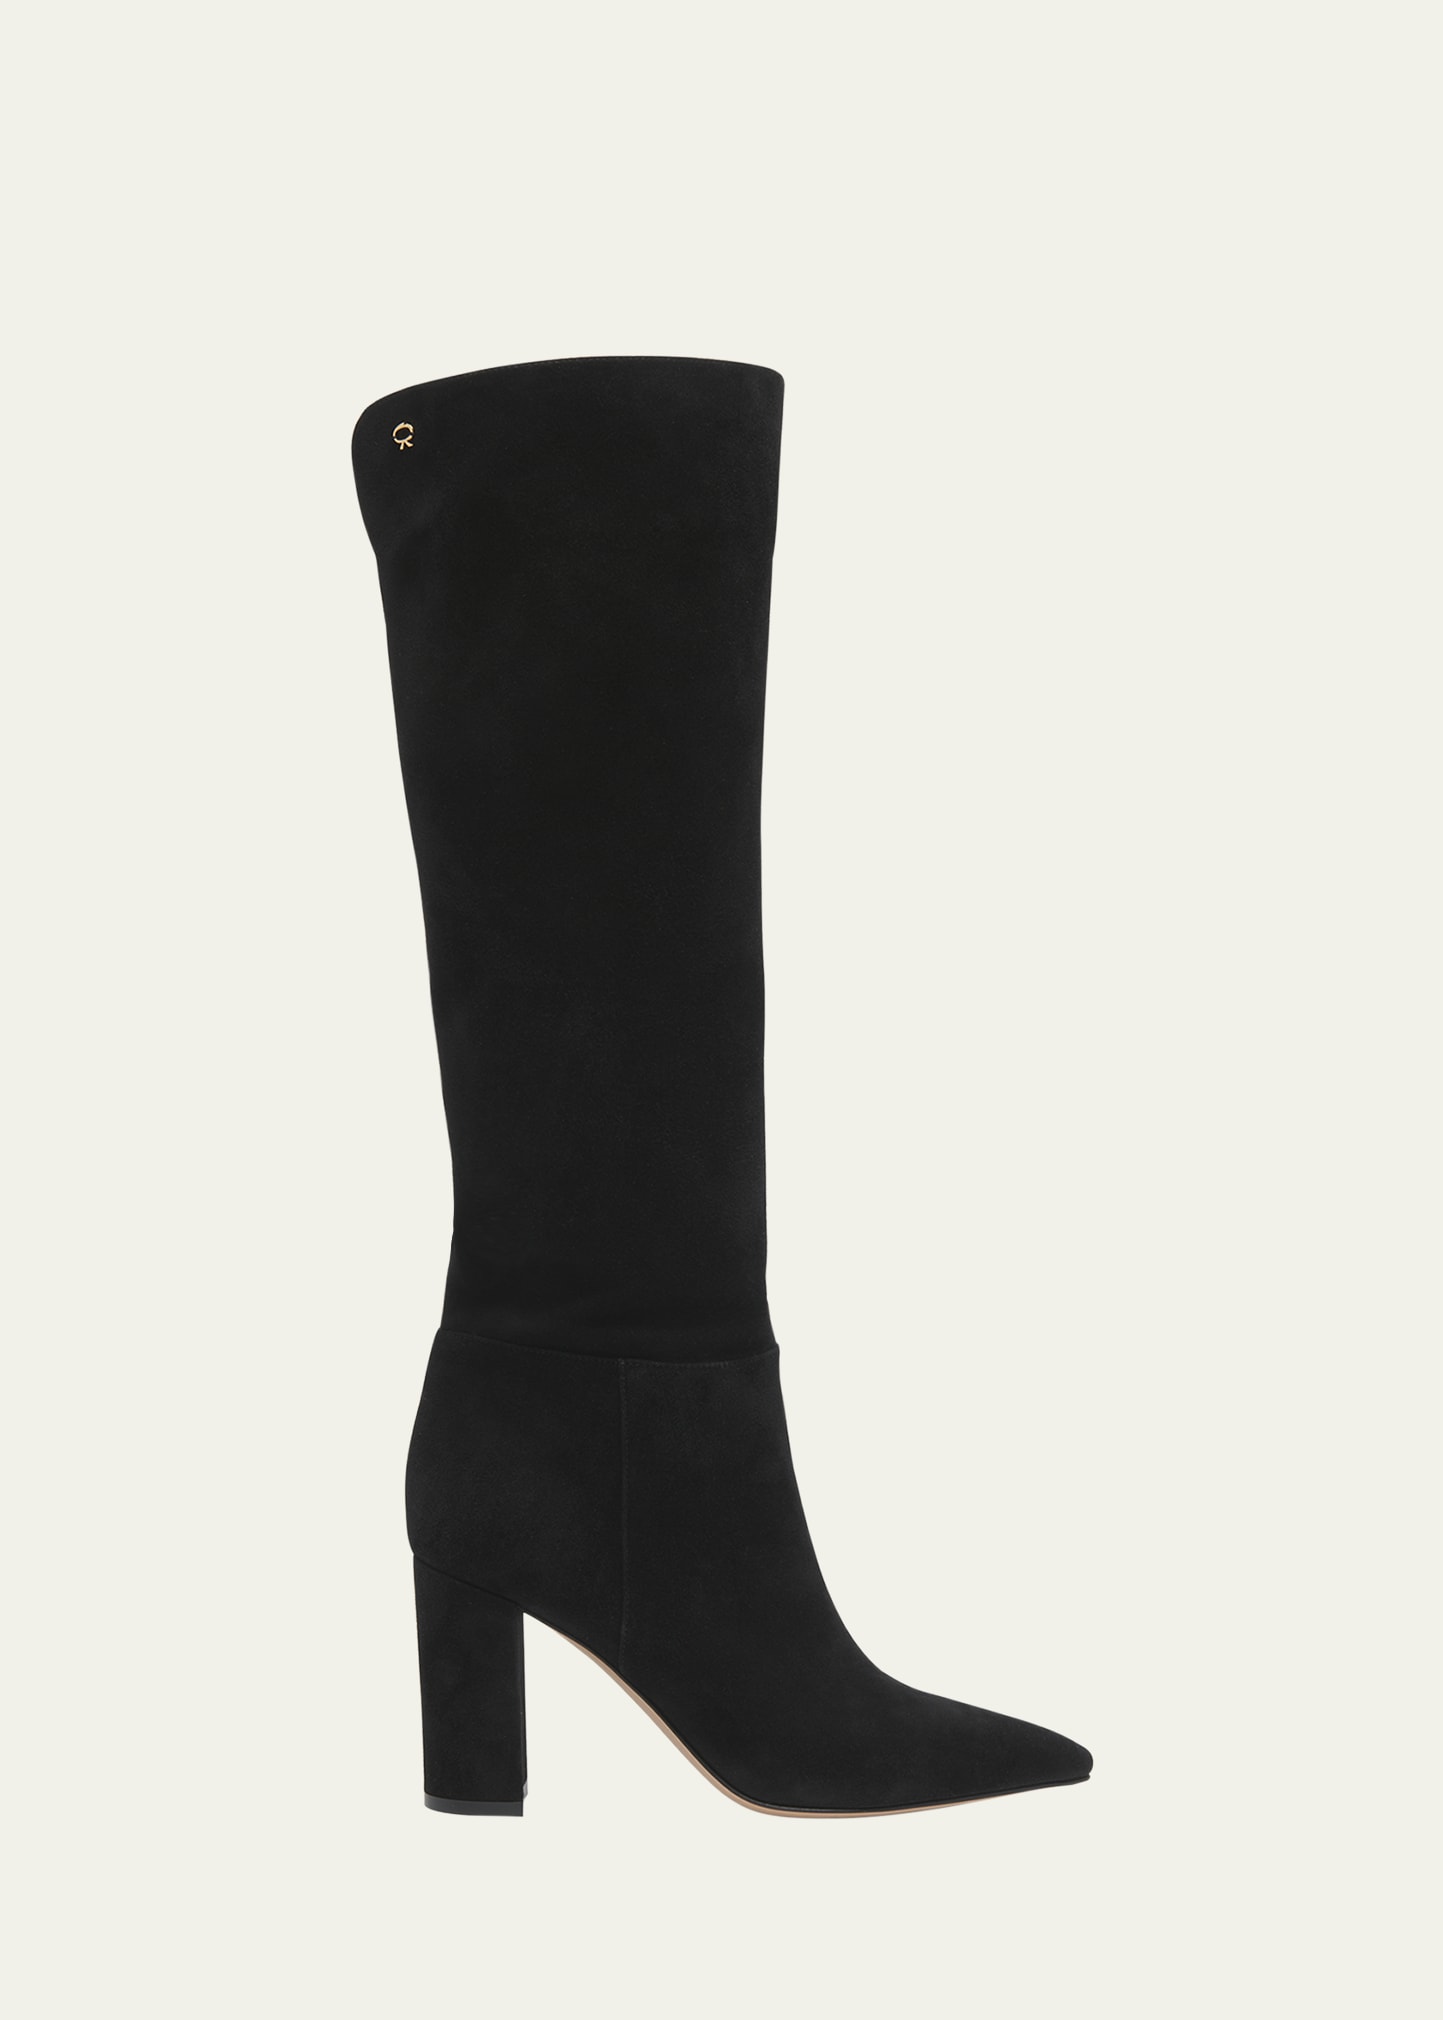 Gianvito Rossi Piper Knee-high Suede Boots In Black